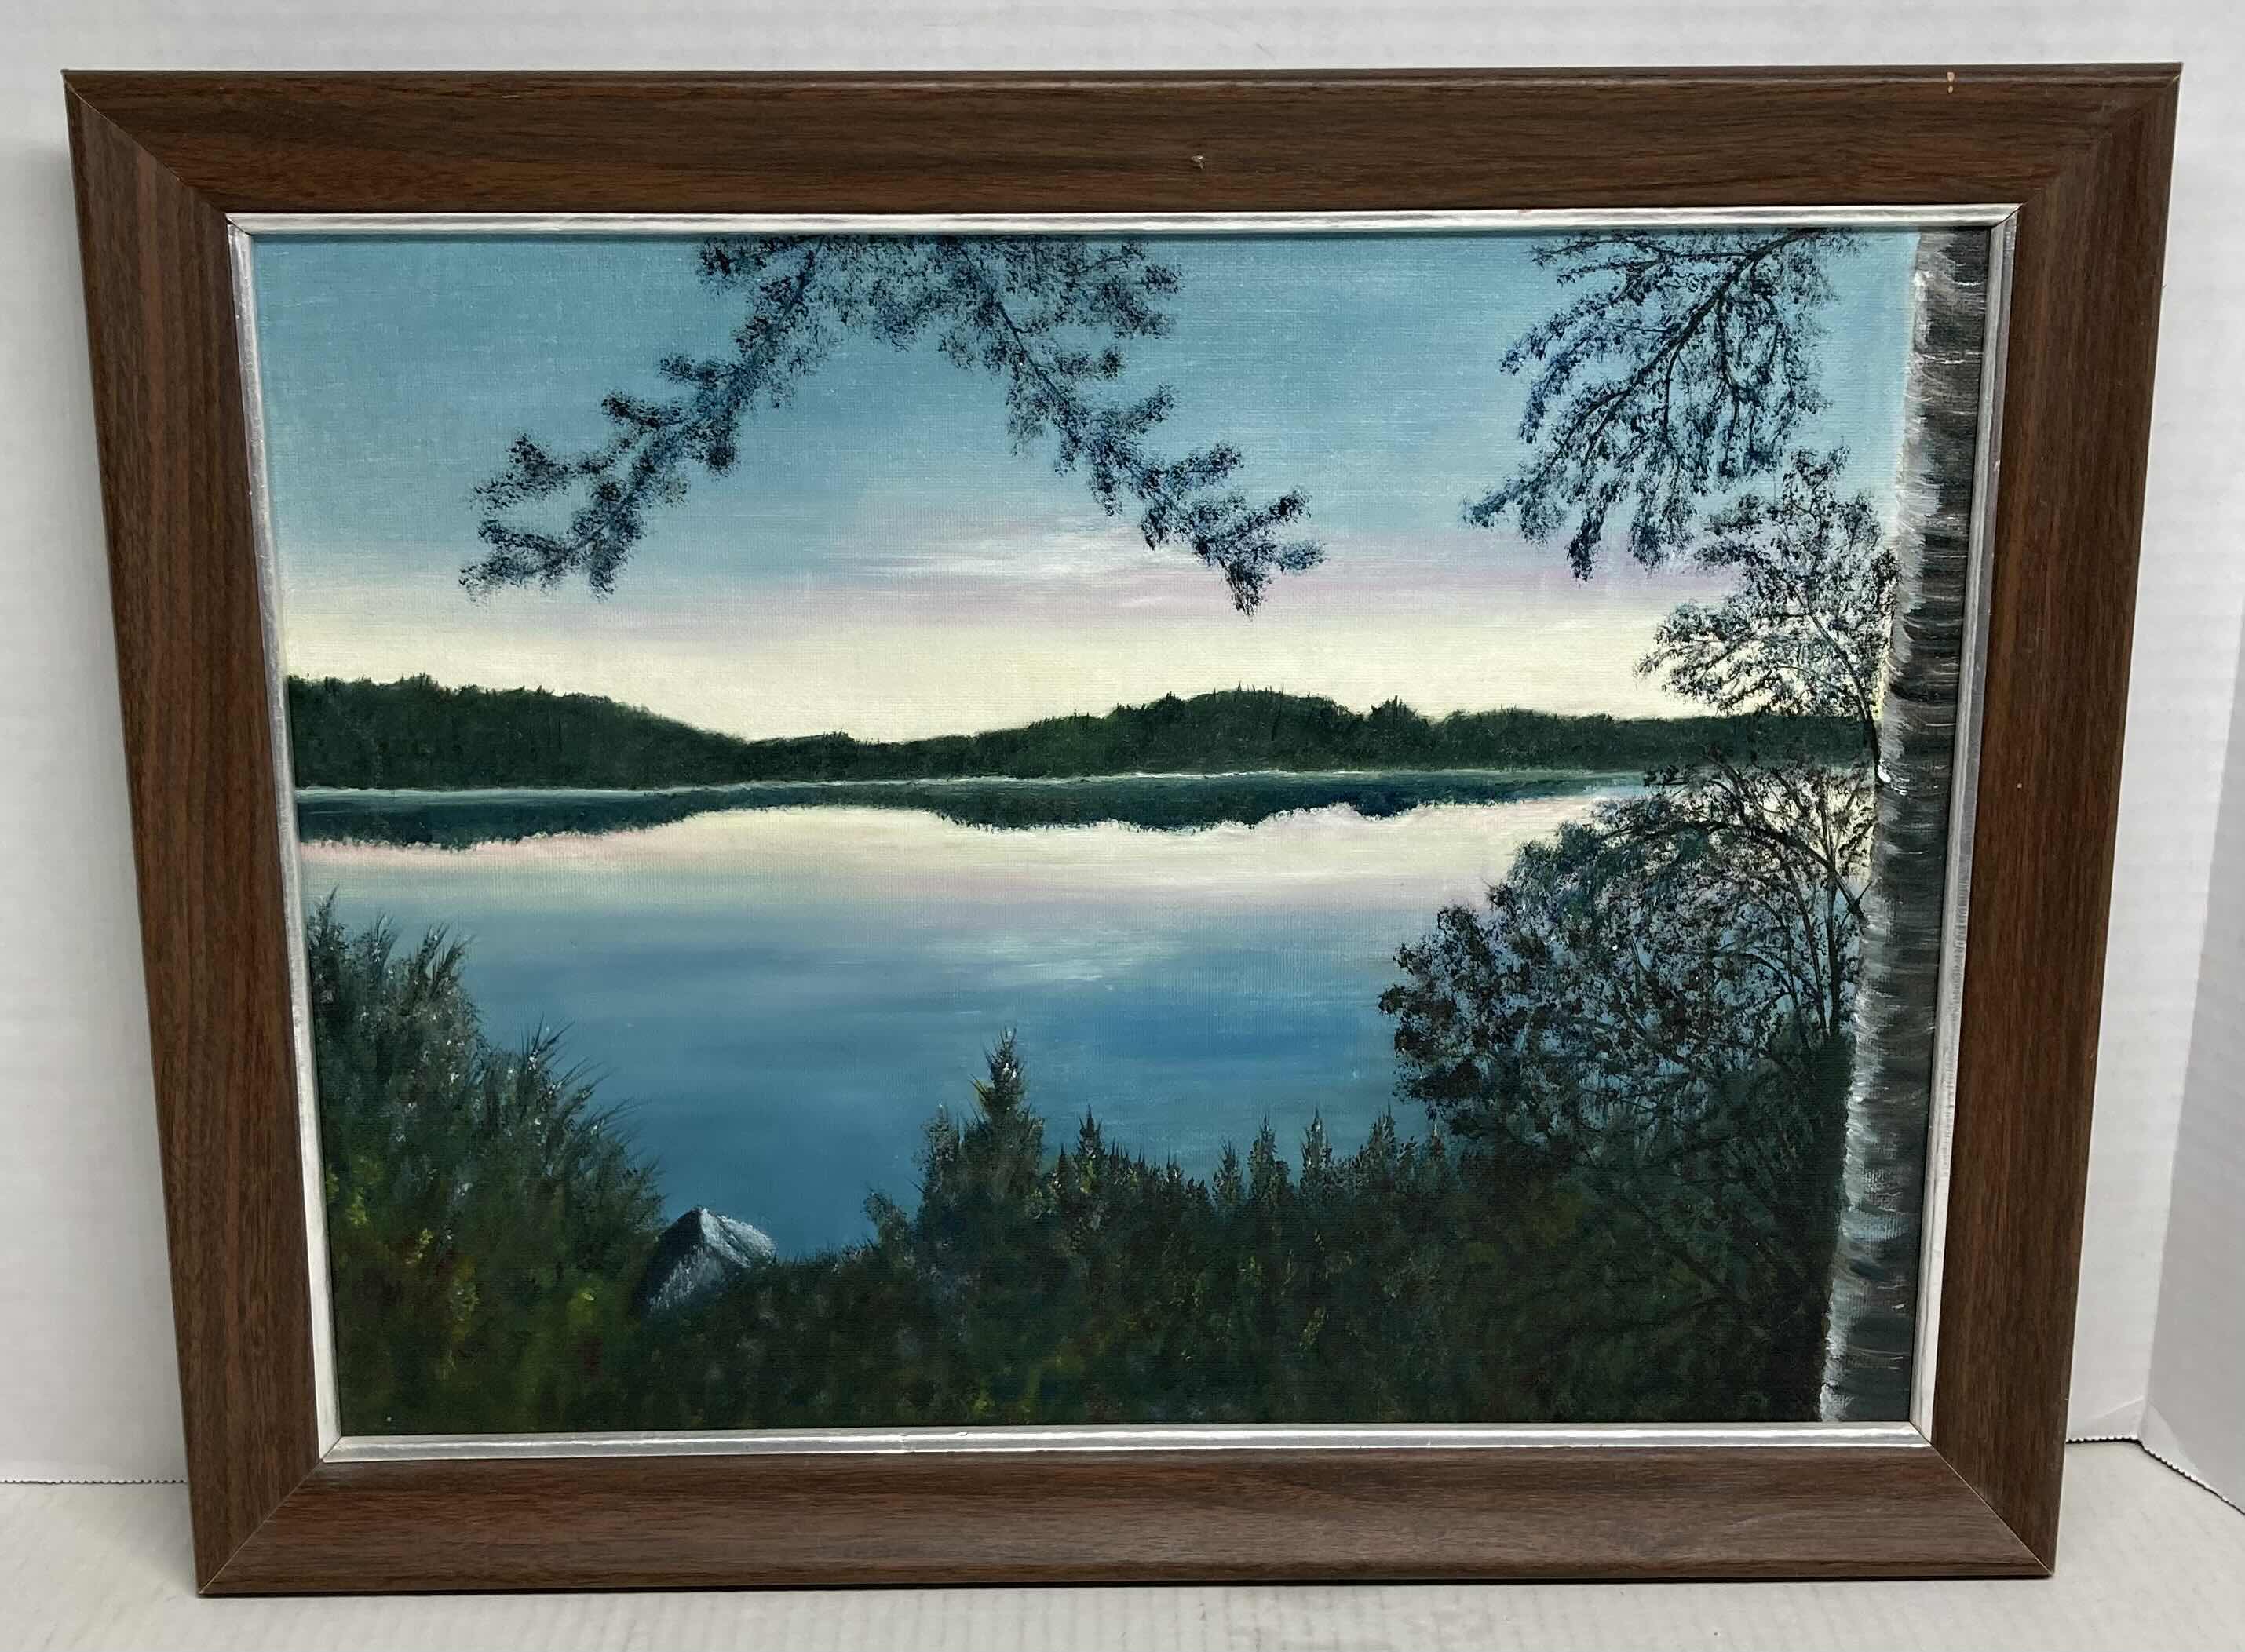 Photo 1 of SCENIC LAKE PAINTING FRAMED ARTWORK SIGNED BY MARGARET COWELL 18.25” X 14.25”